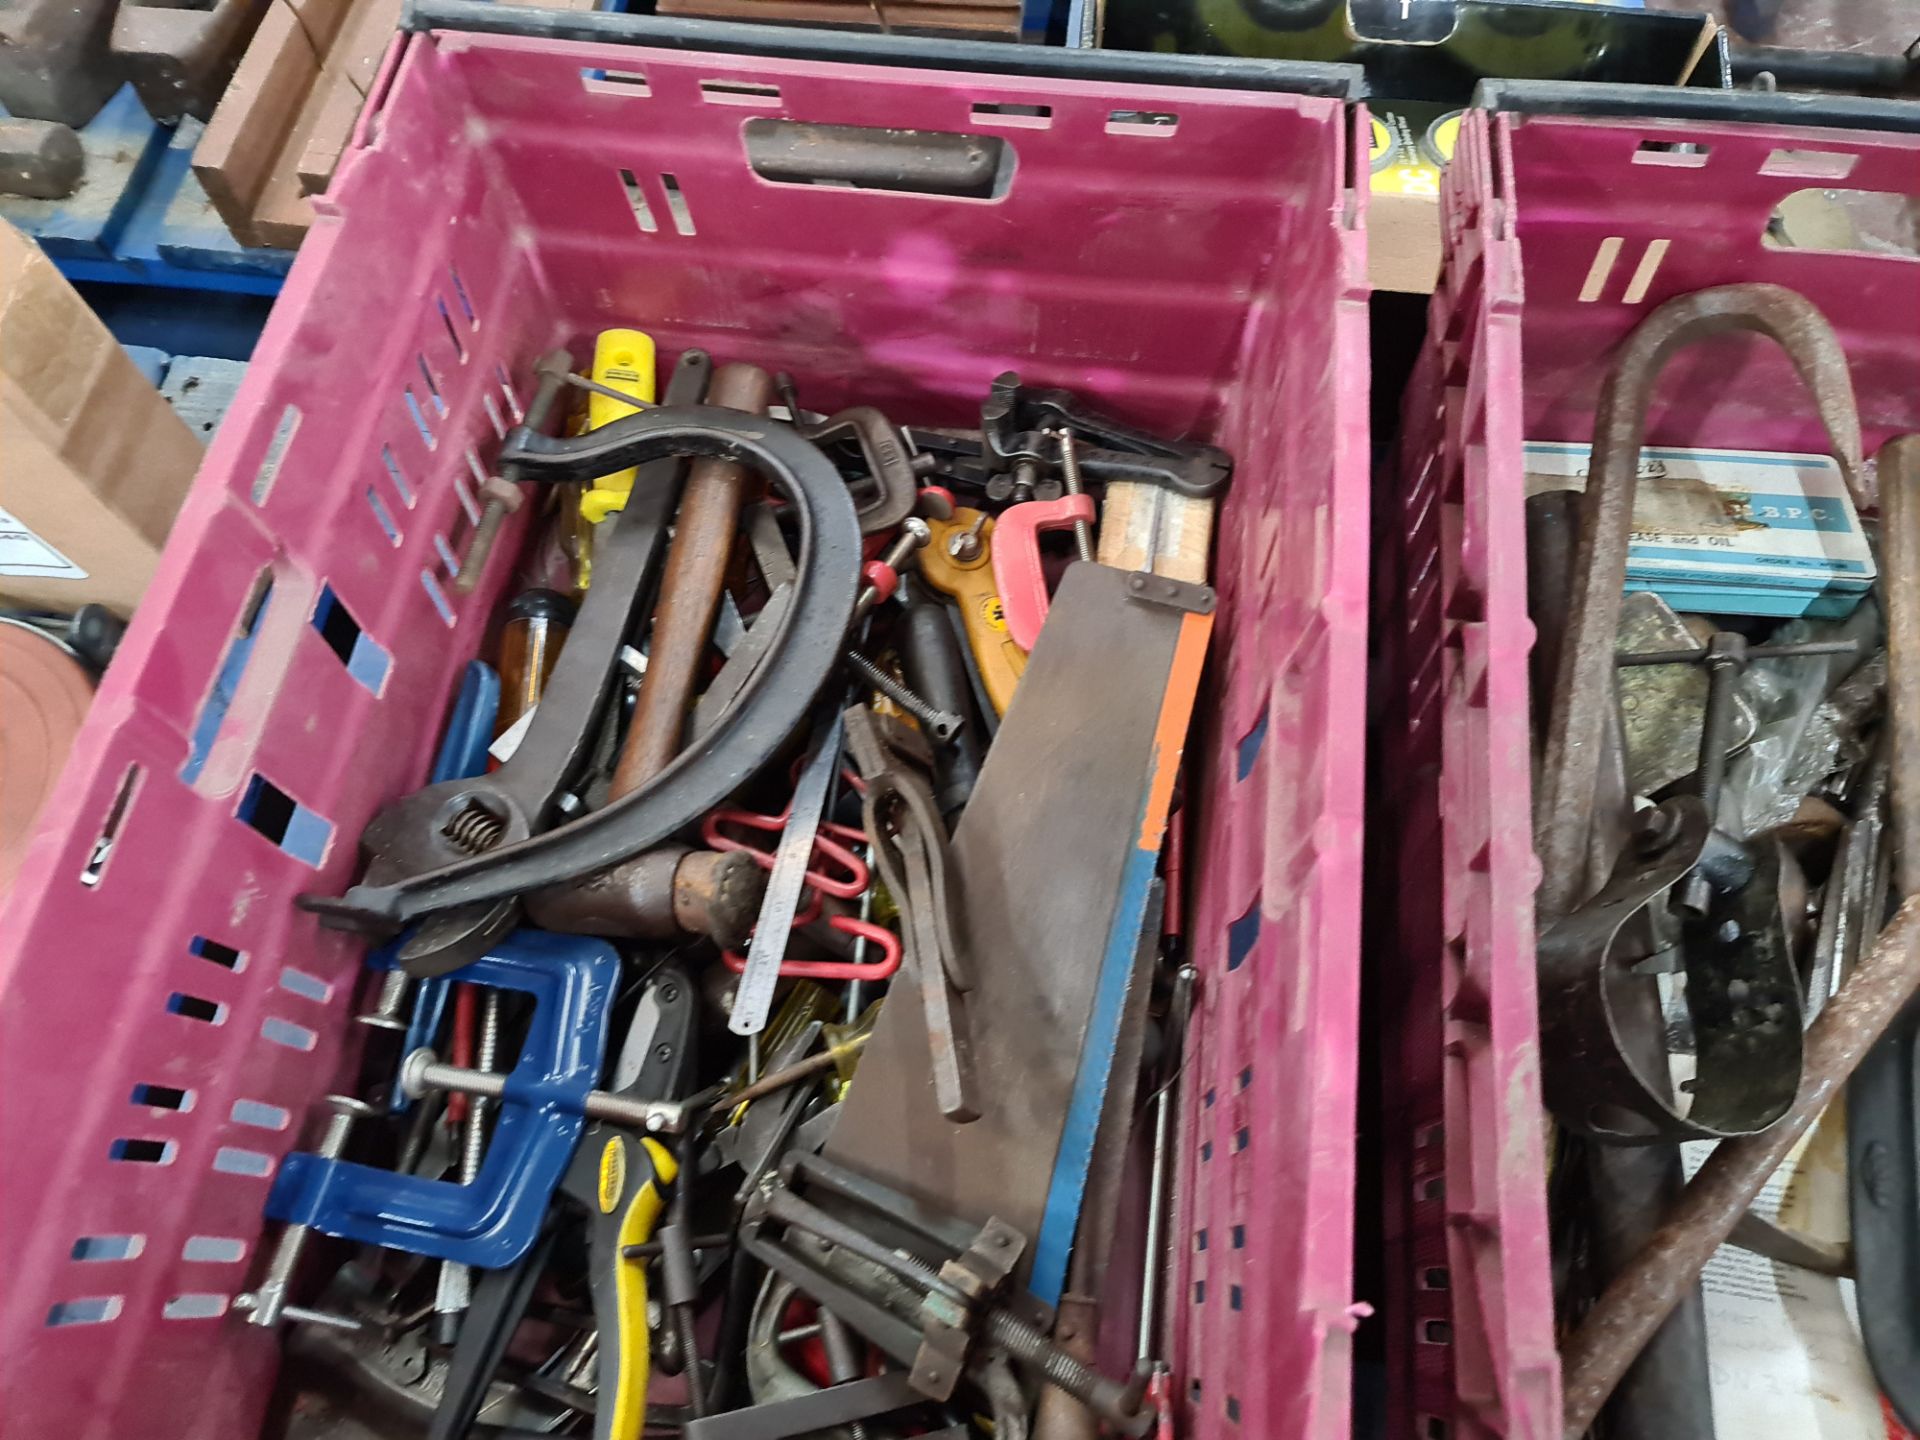 Contents of a pallet of assorted hand tools & more - please note the 2 plastic crates & the pallet i - Image 5 of 10